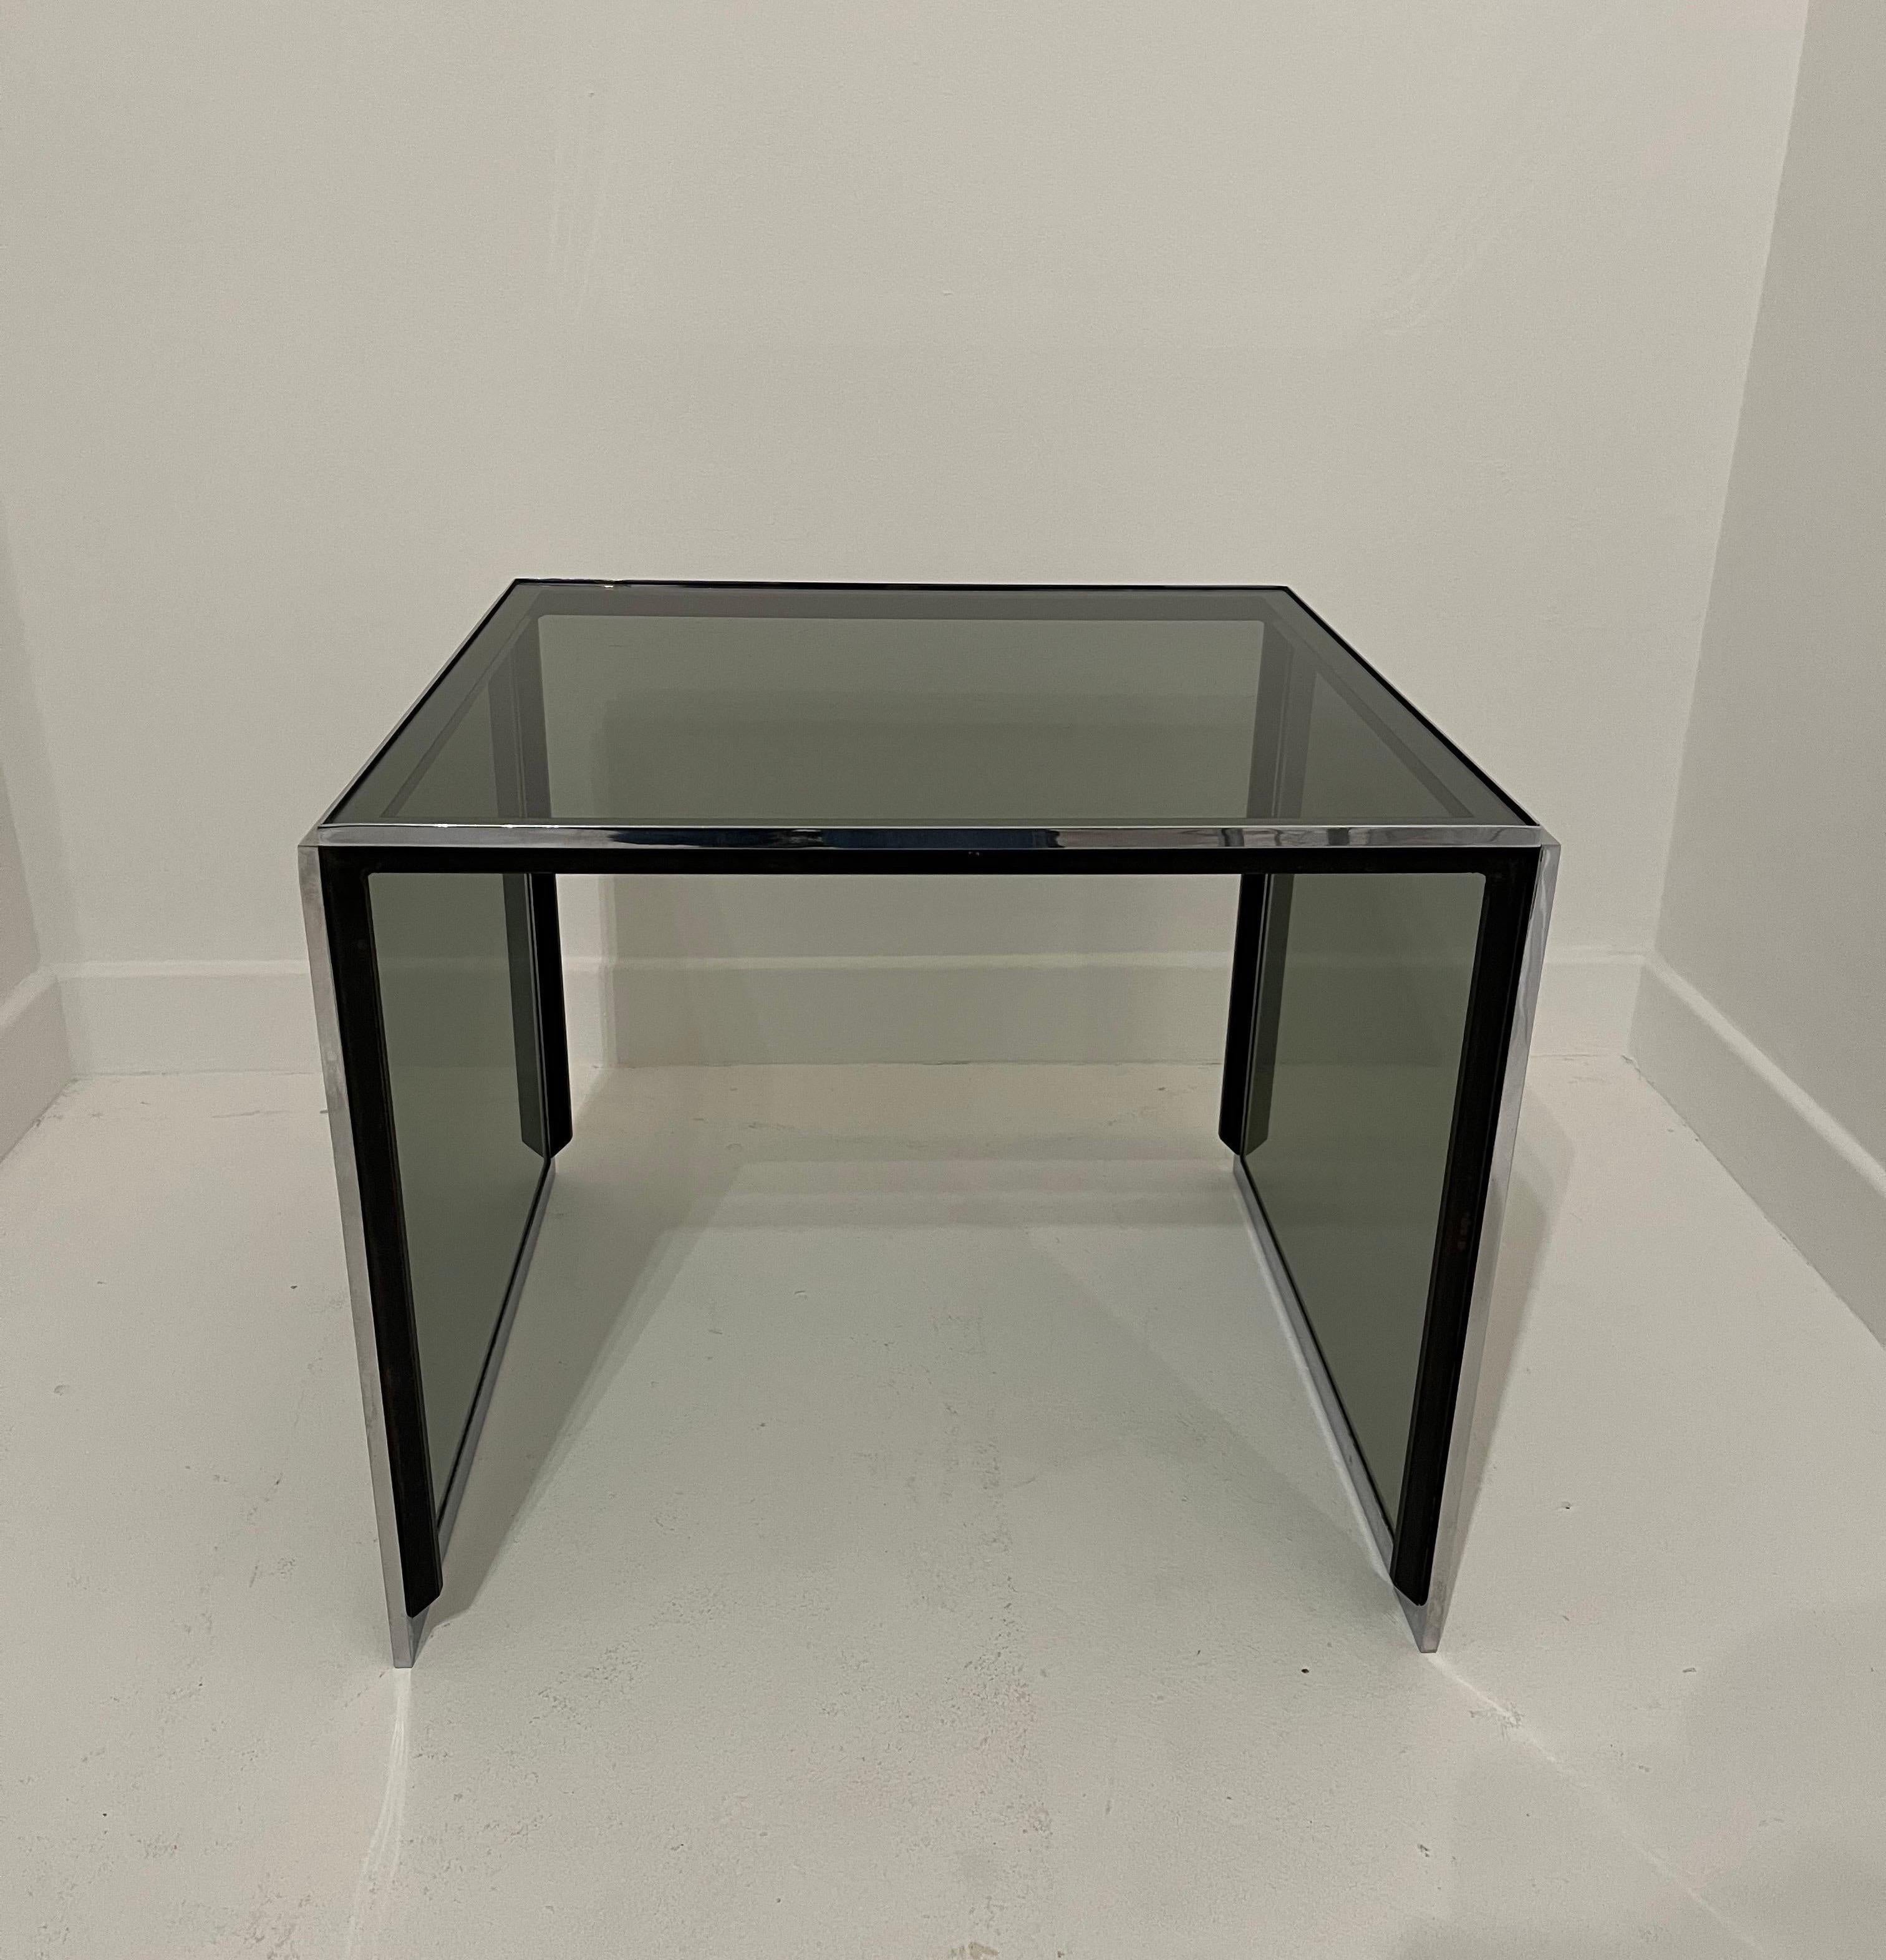 Great sleek design
Mirror edge to glass
Top glass has some light scratches impossible to catch in camera, can be seen by eye but not when standing.
Wear to black inner frame shown.
Really nice mirrored outer frame to glass.
With some damage to one